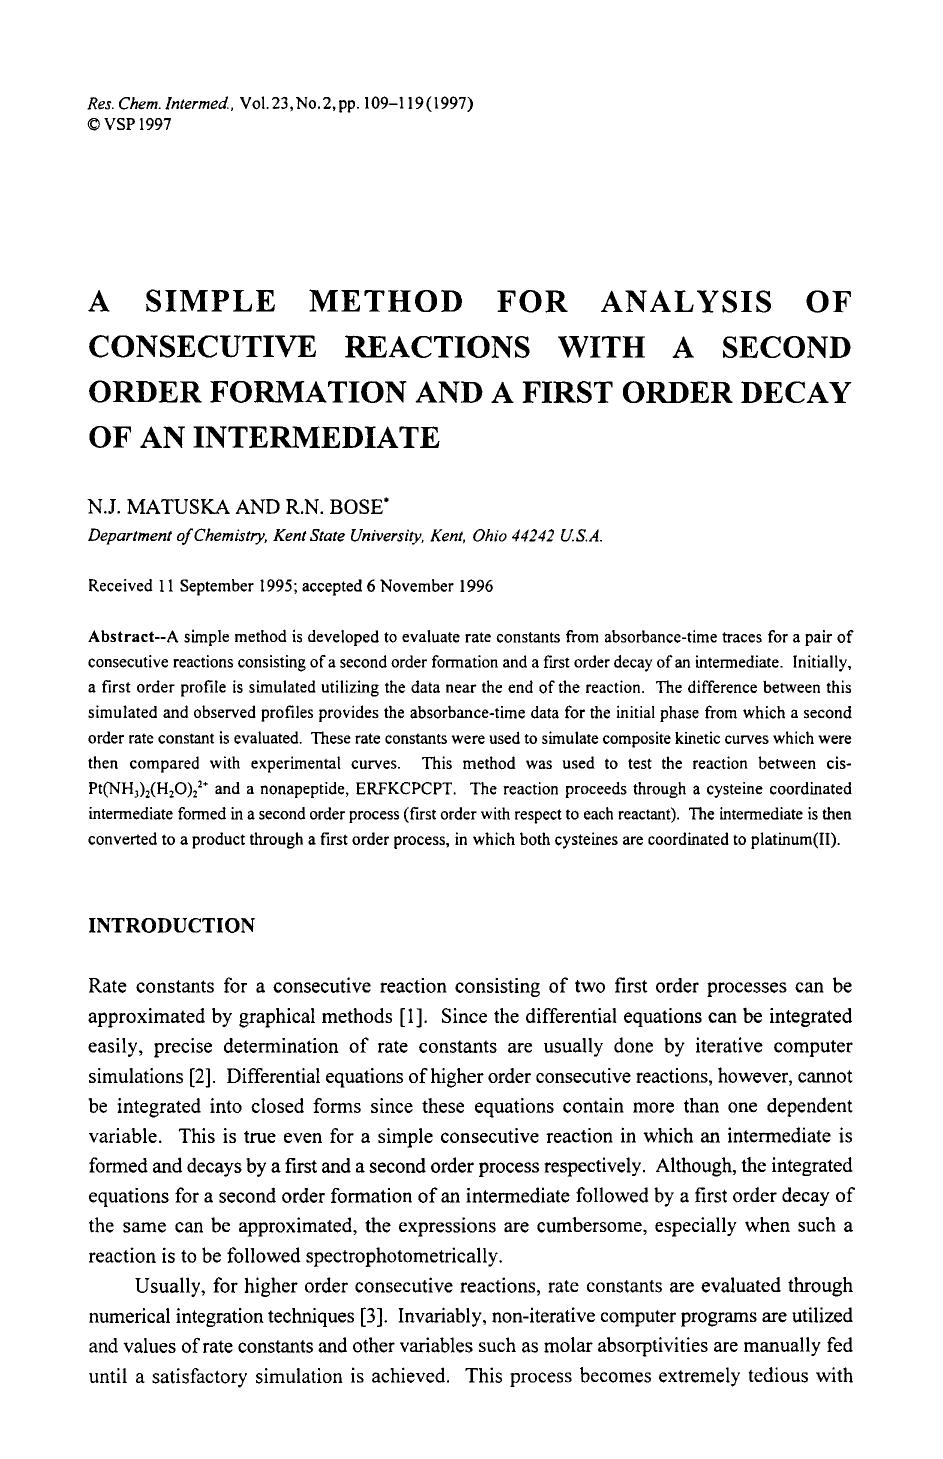 A simple method for analysis of consecutive reactions with a second order formation and a first order decay of an intermediate by Unknown